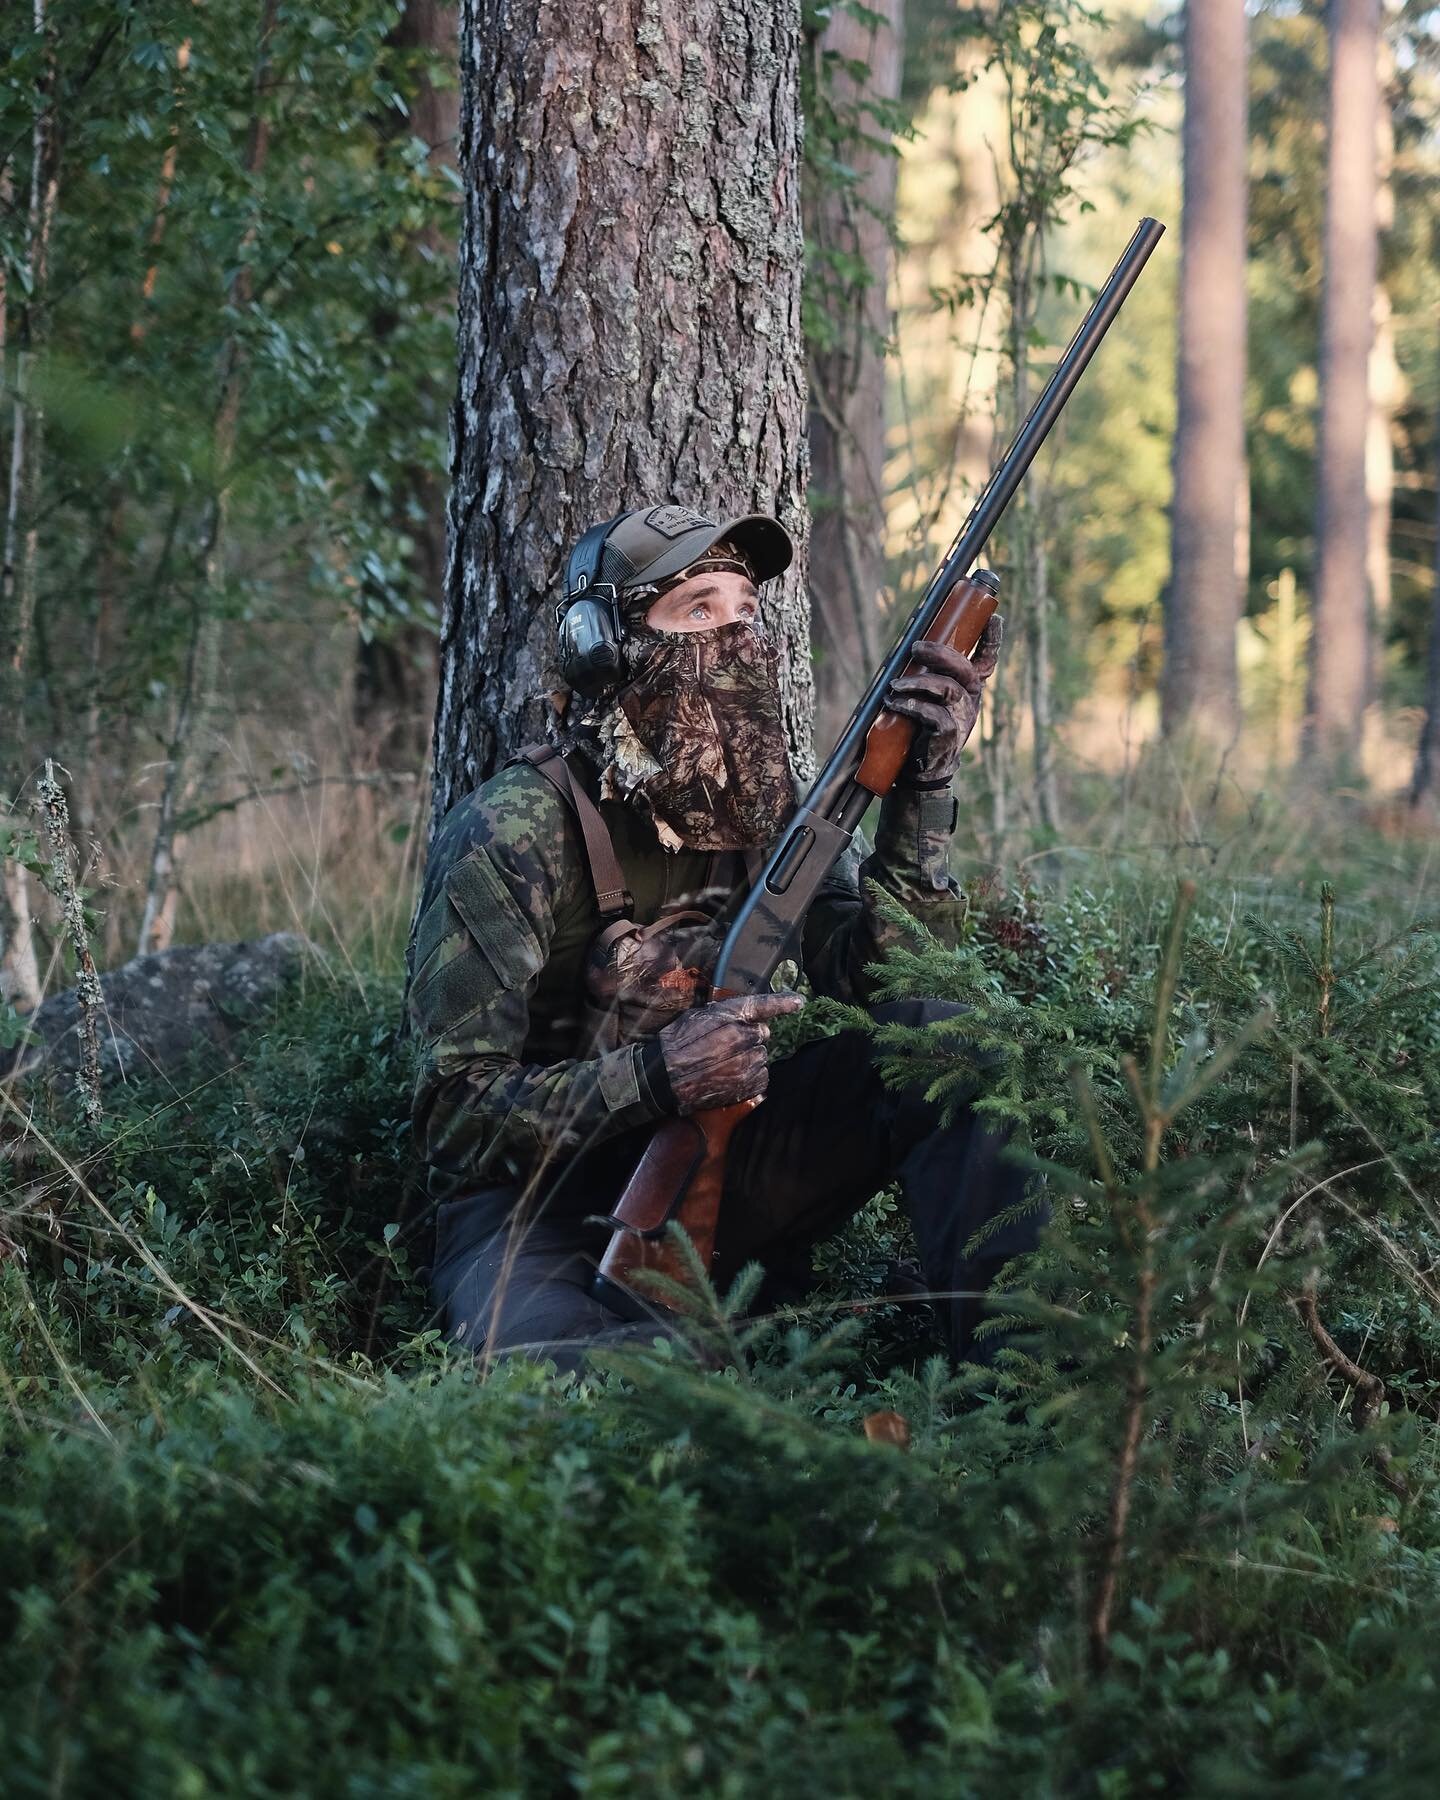 I'm a hunter. It takes deeper roots every time I get outdoor to hunt or to practice. I hunt because it provides me meat, but most of all, because it makes me connected. To myself, to other people and nature. Hunting forces me to face the concequences